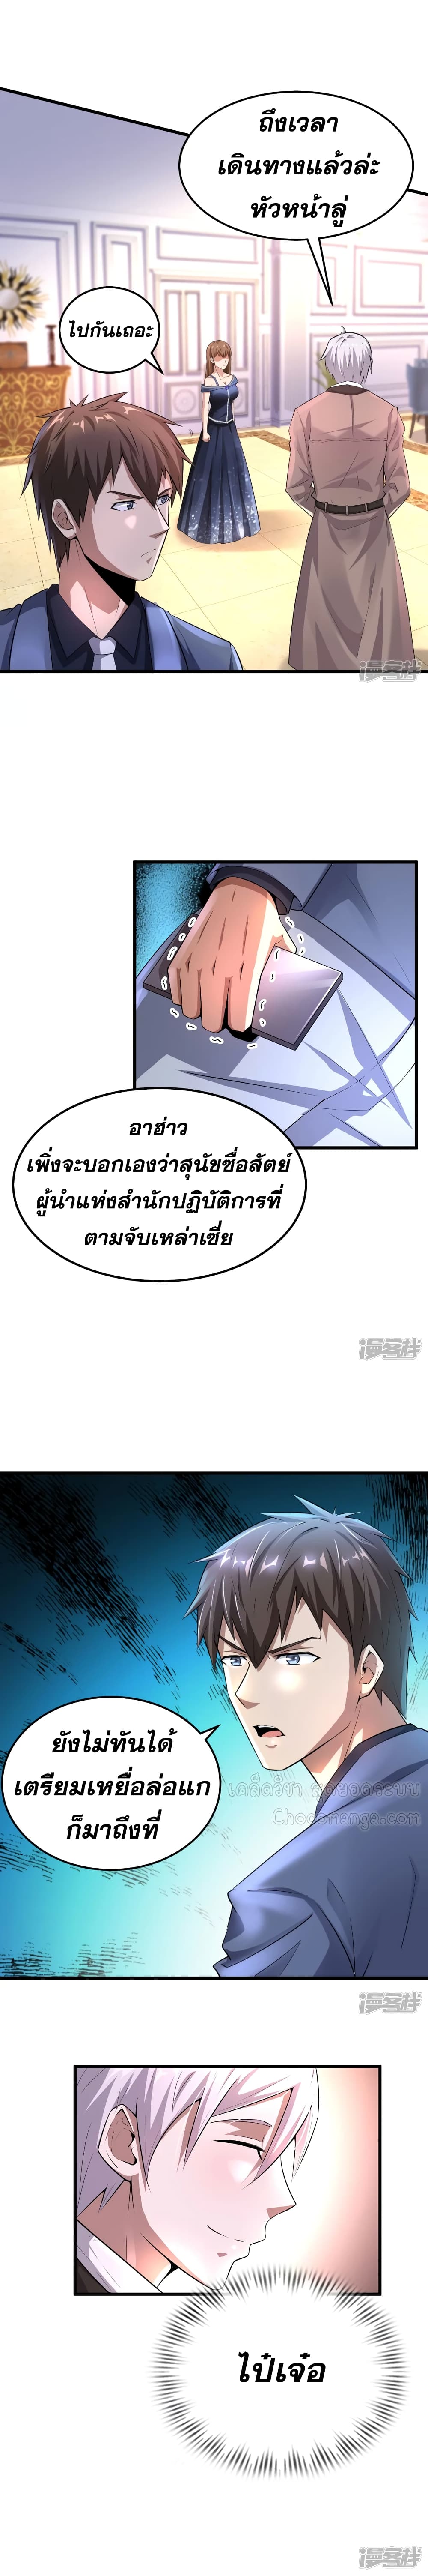 Super Infected ตอนที่ 9 (11)